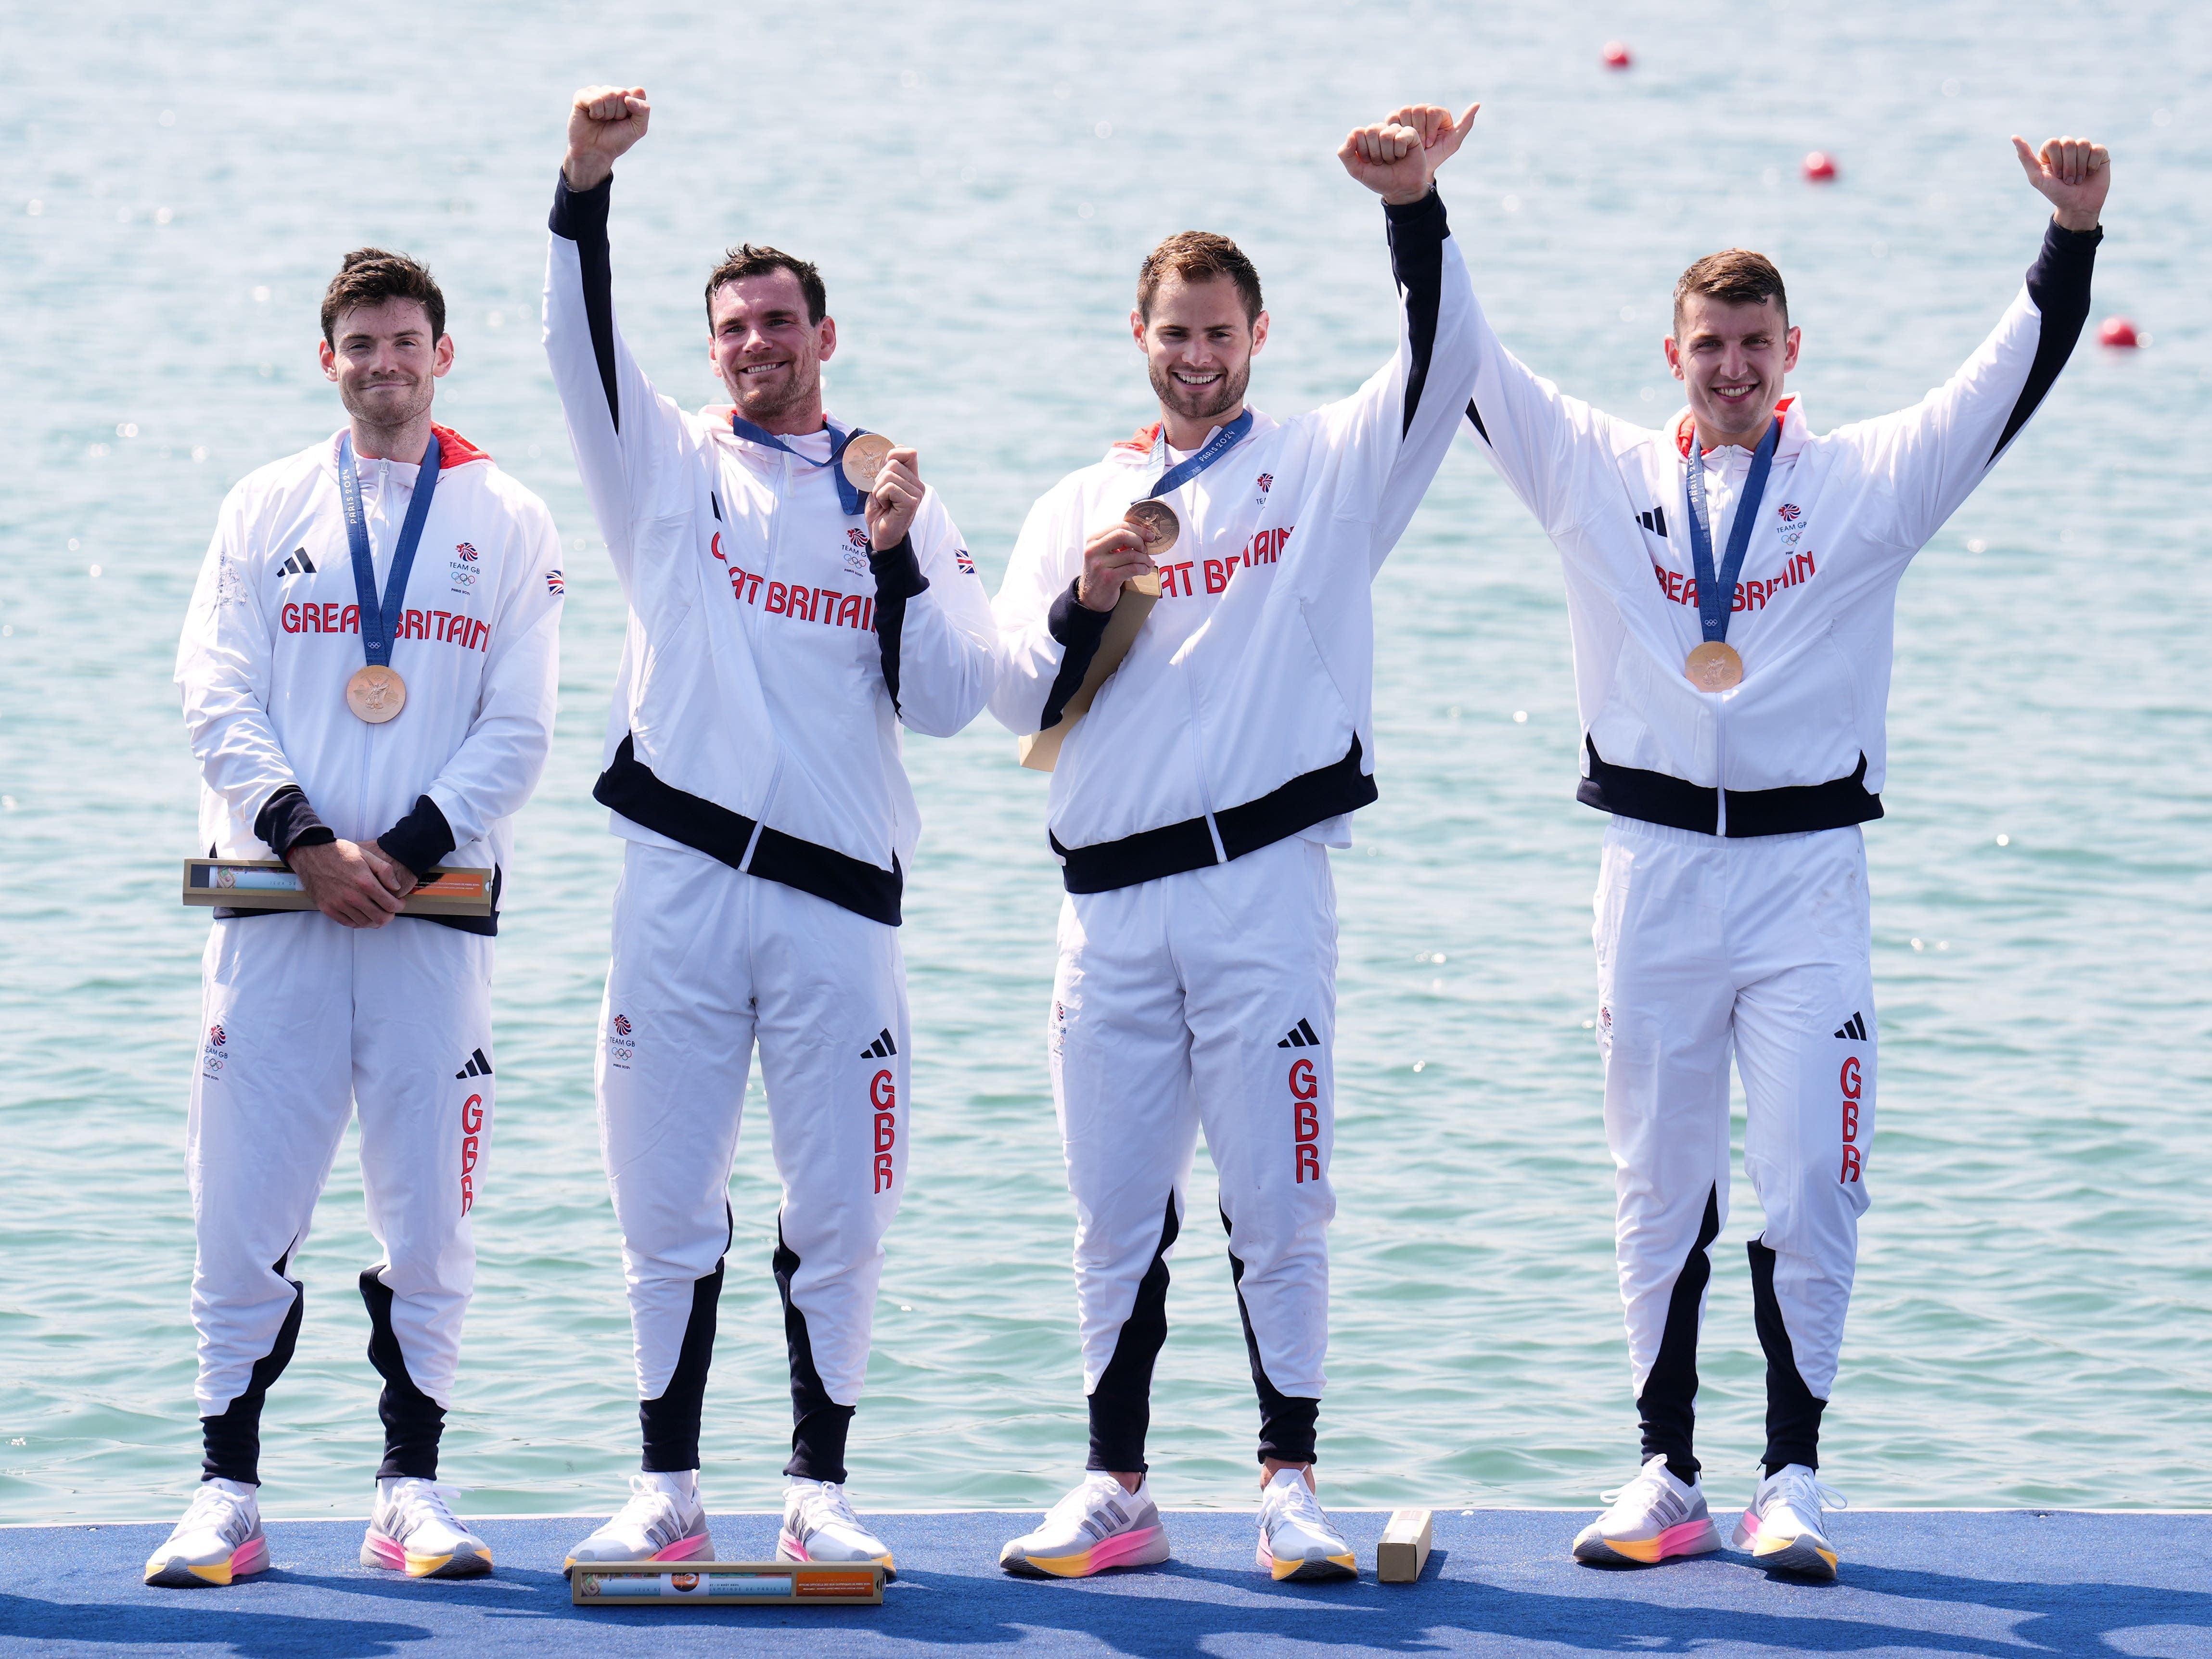 Father ‘still shaking’ after son’s bronze as GB rack up Olympic medals in rowing